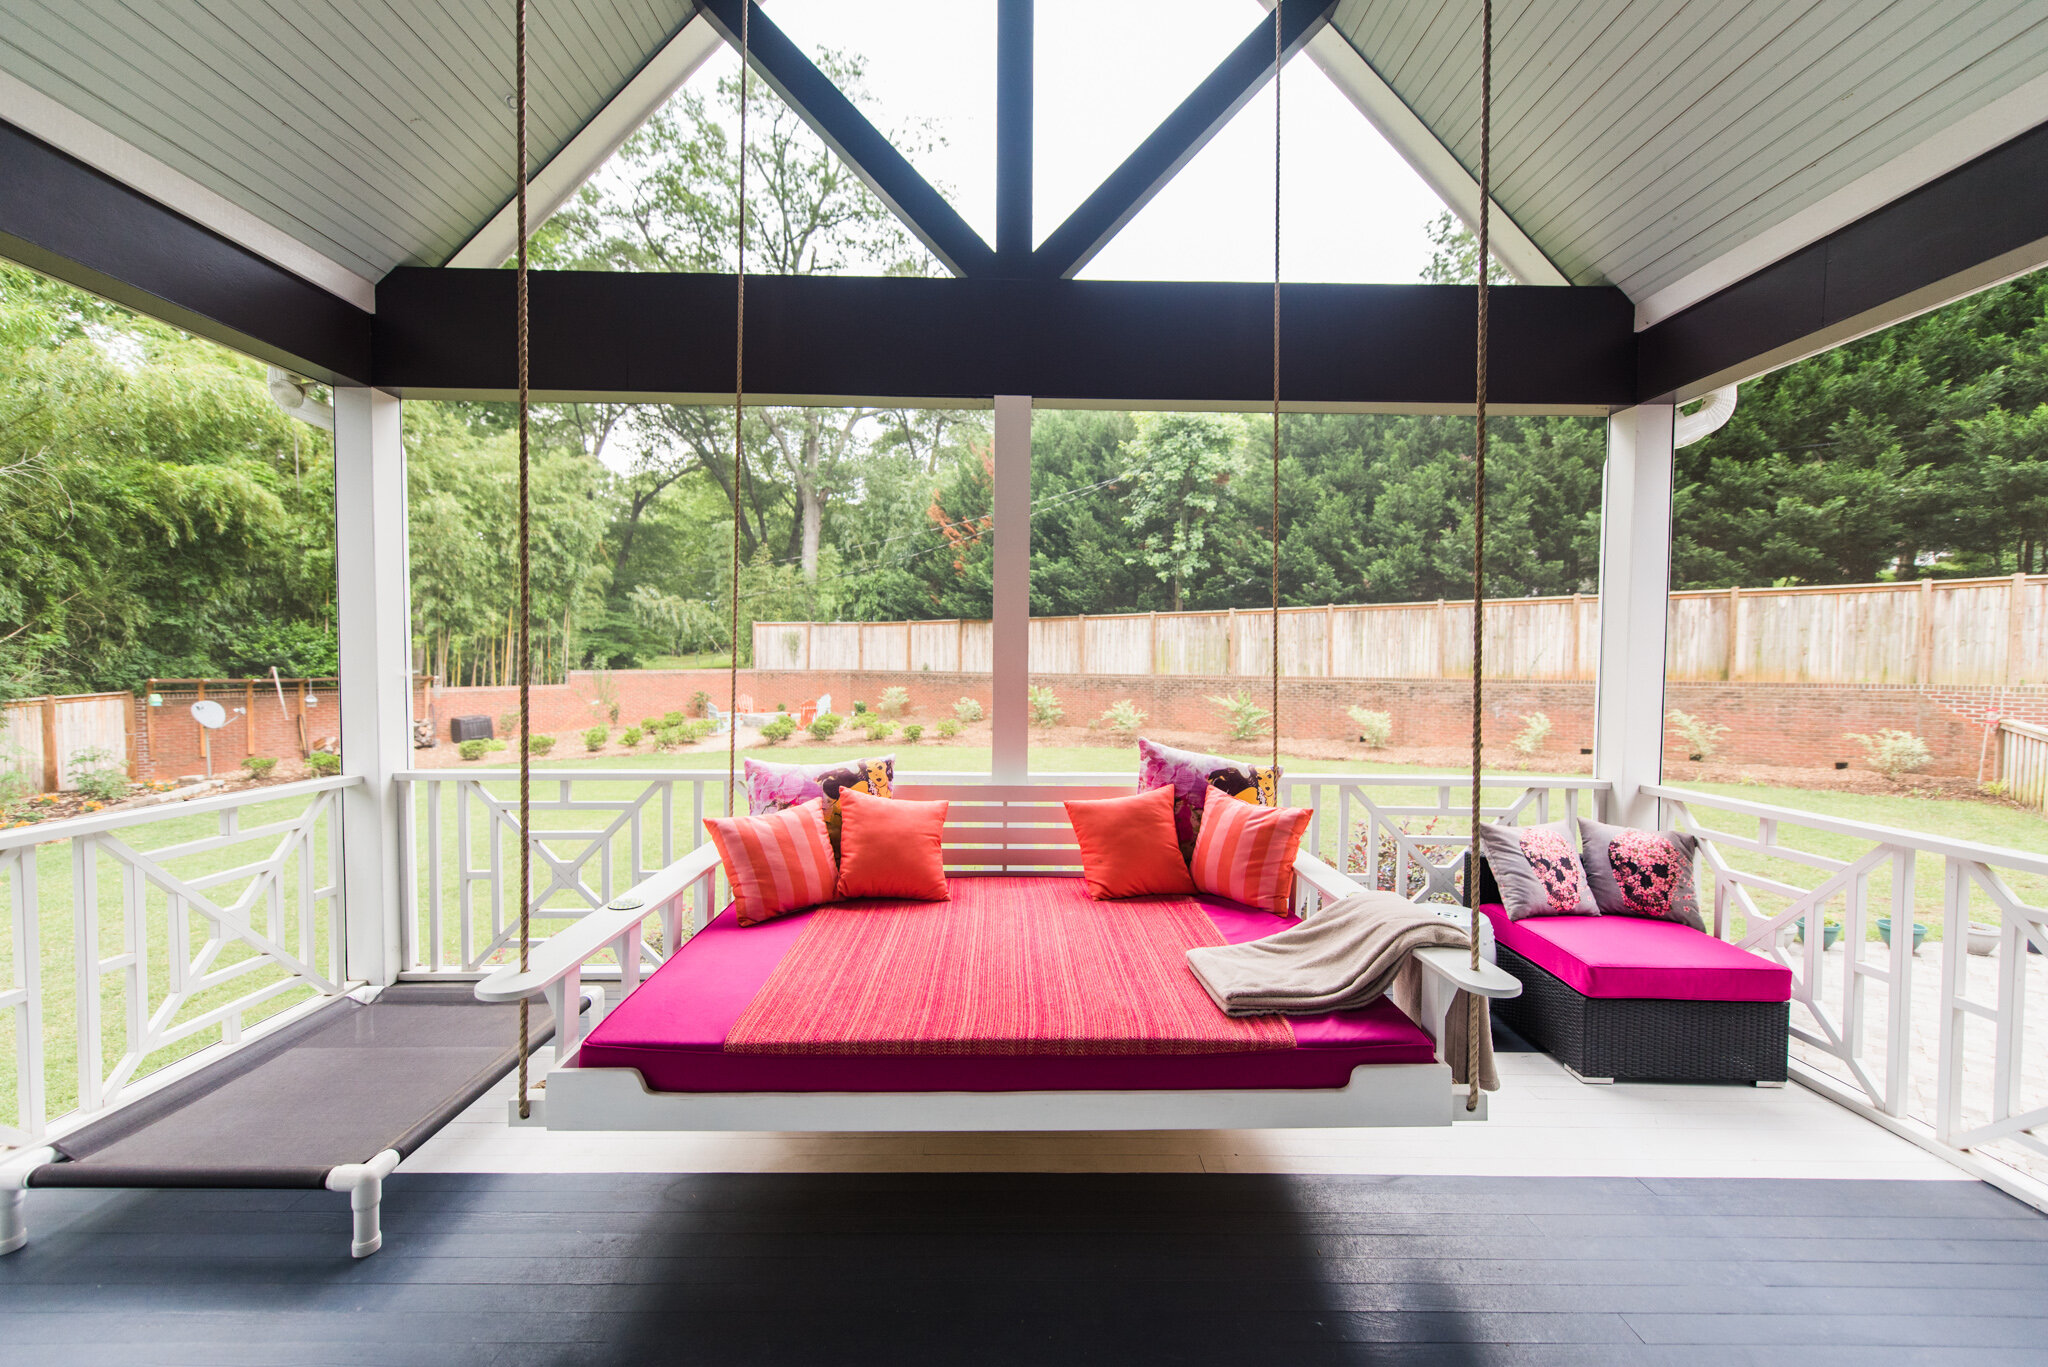 Dwell-Chic-Contemporary-Vibrant-Outdoor-Porch-Swing-And-Seat.jpg